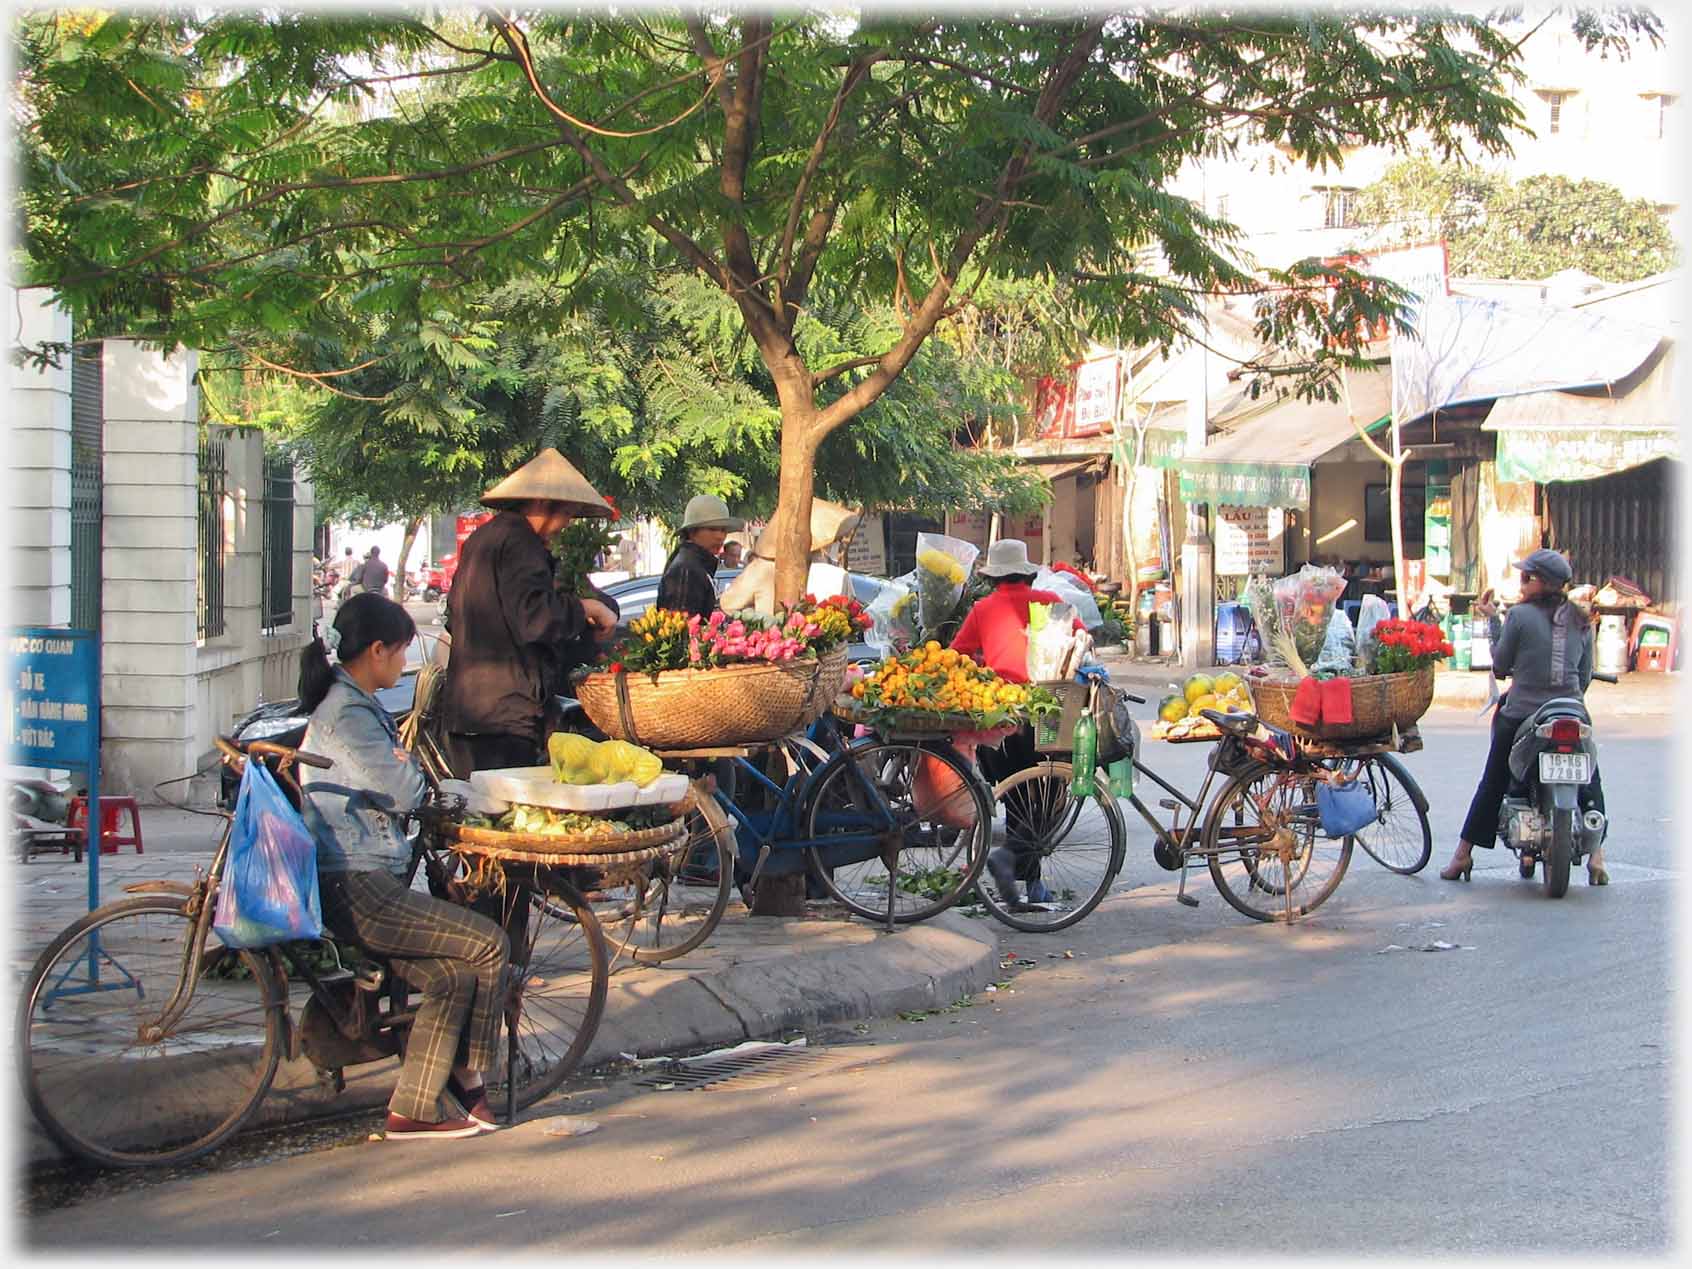 Number of vendors with bicycles gathered at shady corner.